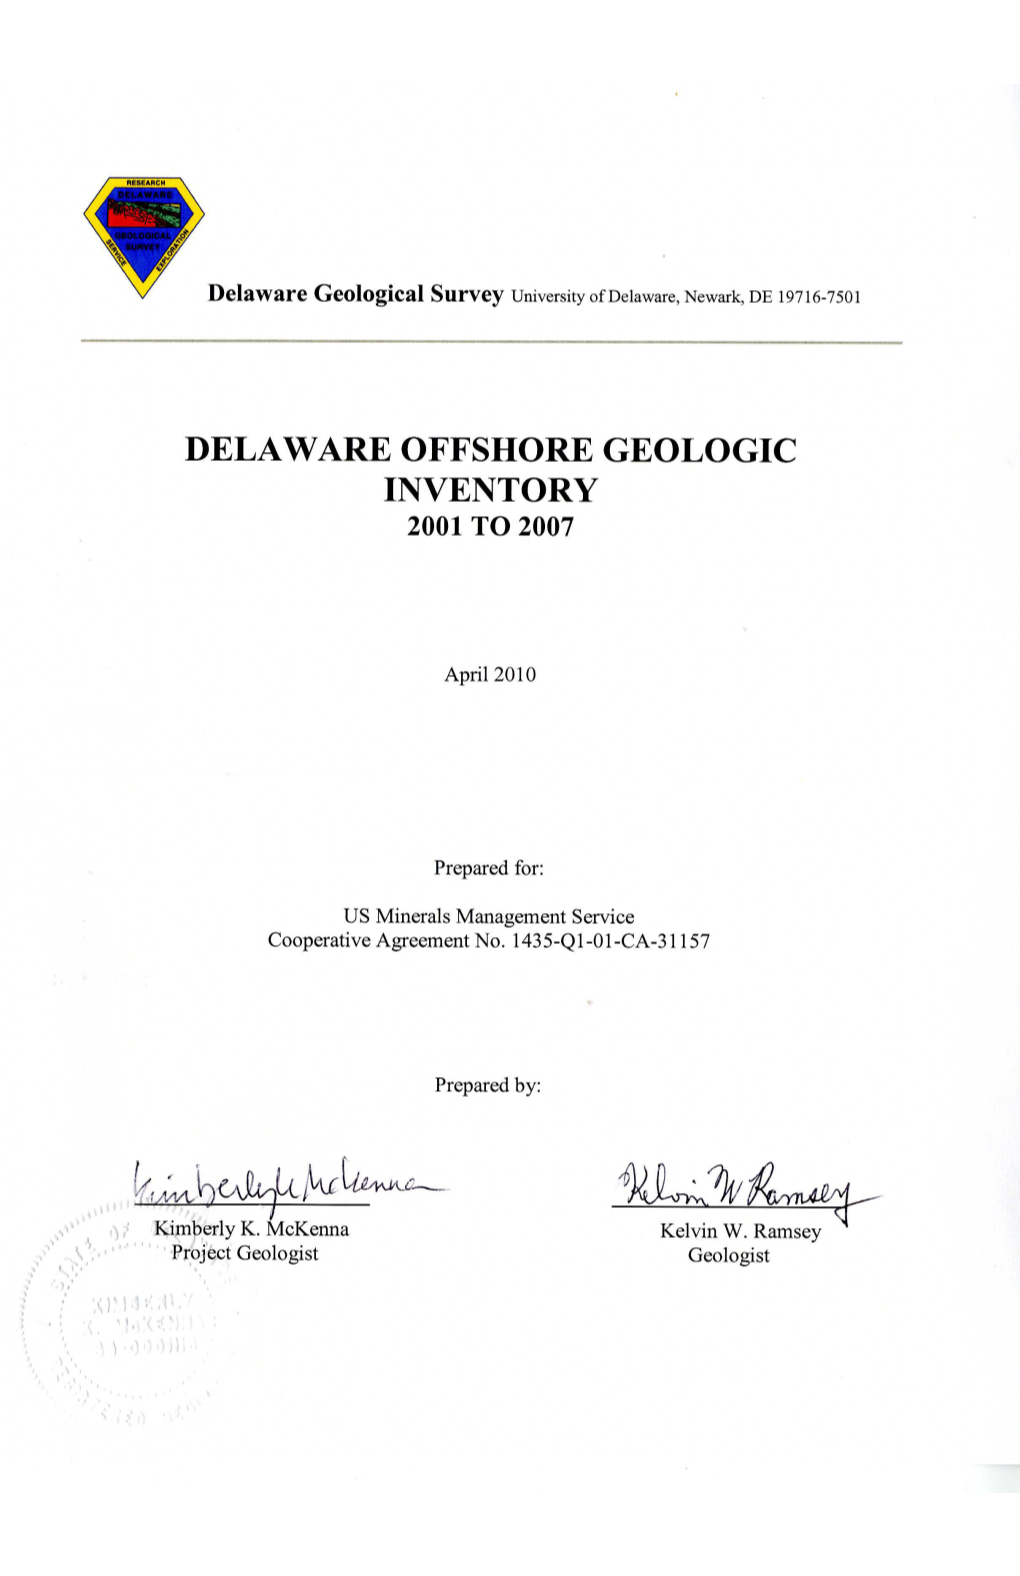 Delaware Offshore Geologic Inventory 2001 to 2008